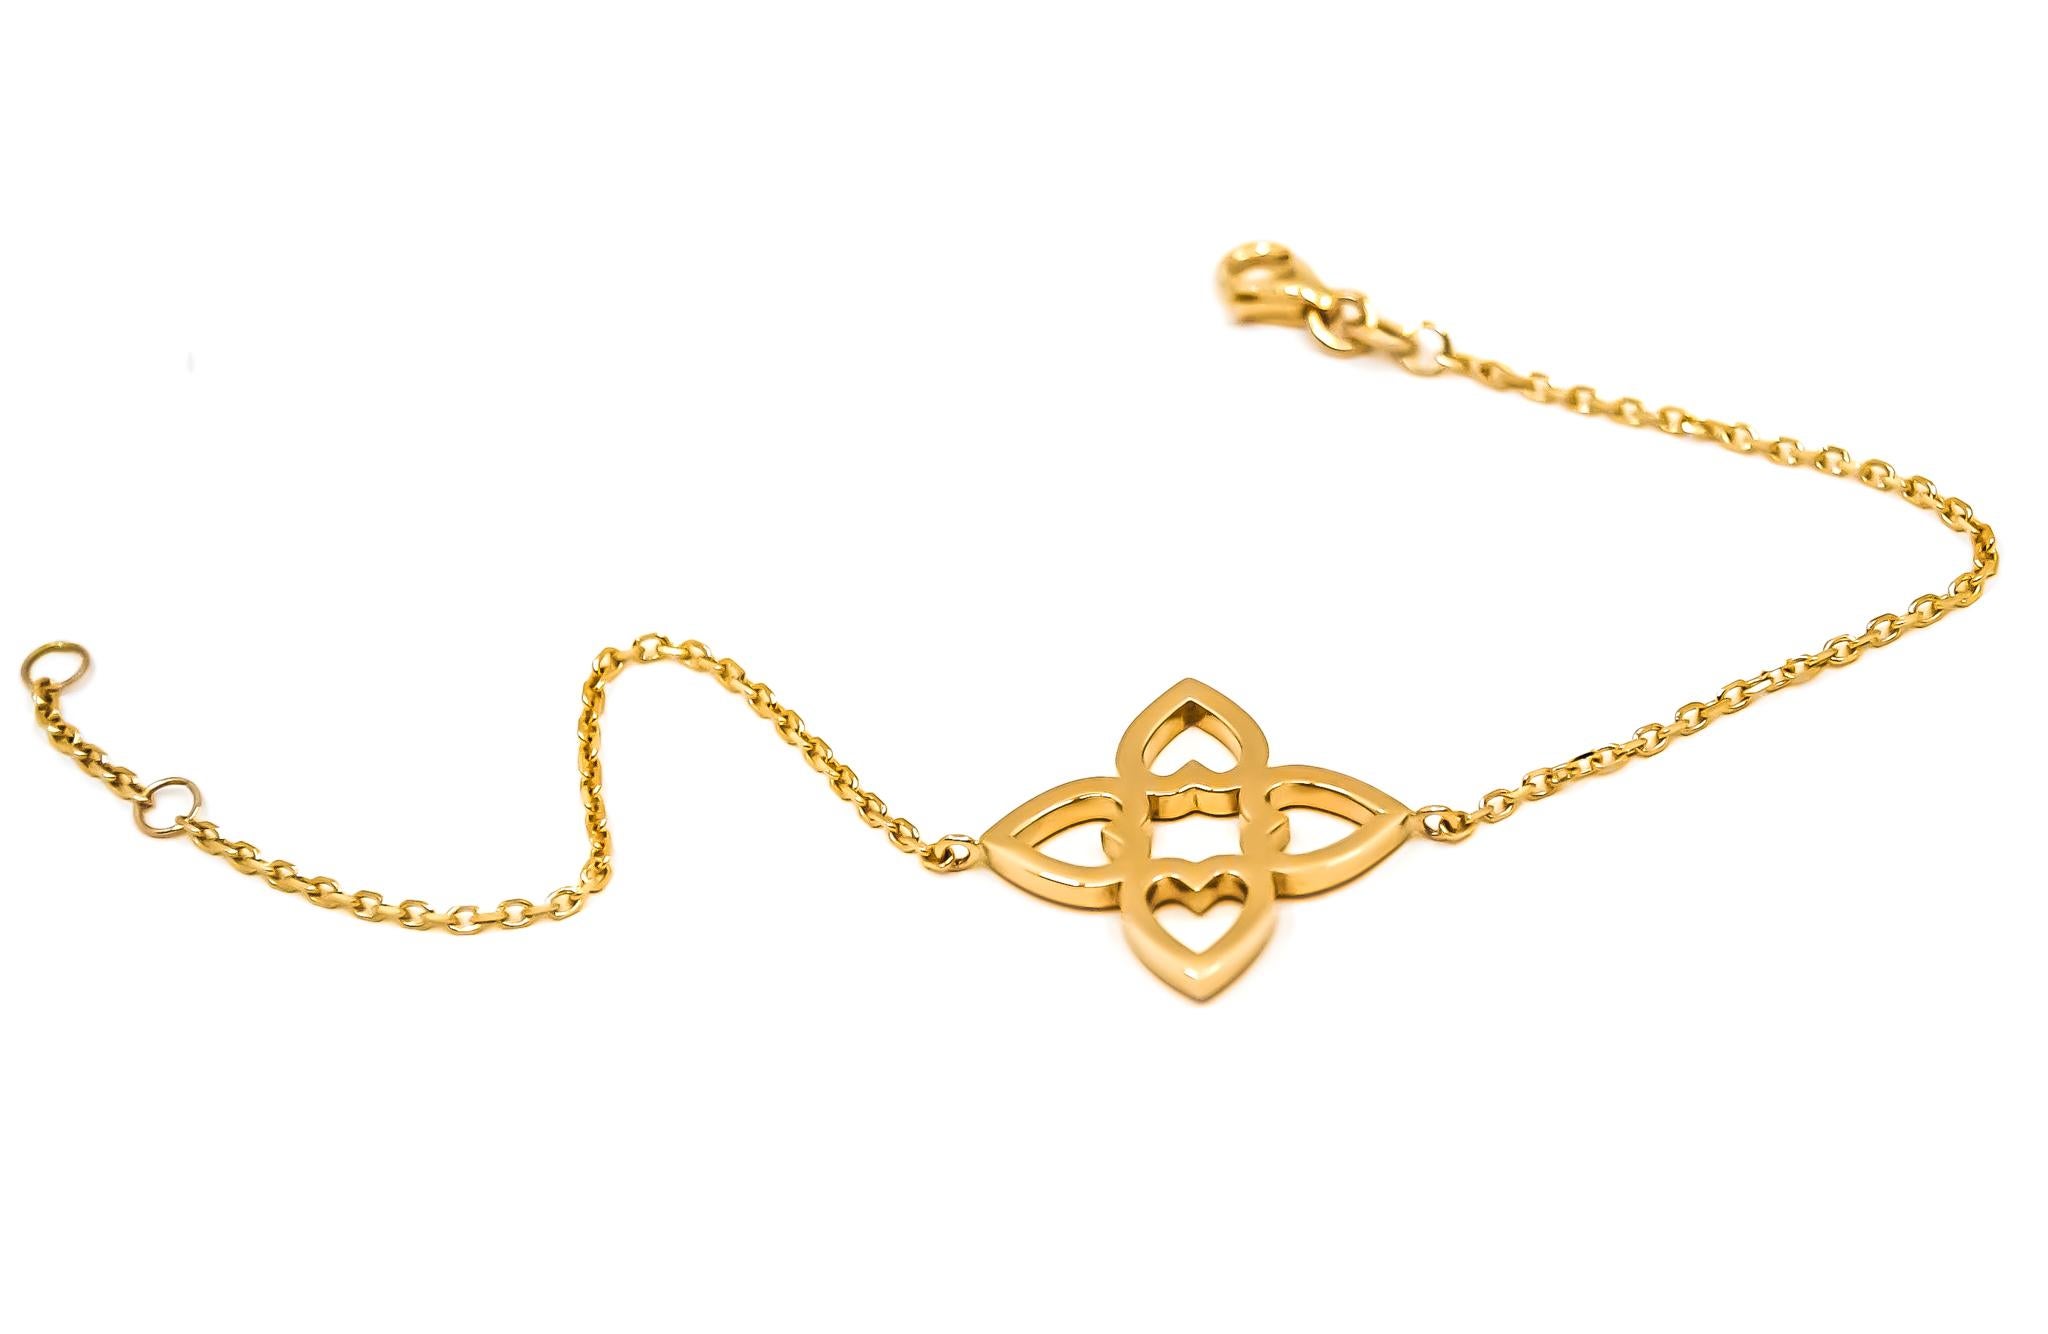 Connected Hearts Bracelet in 18kt Gold In New Condition For Sale In Dubai, AE